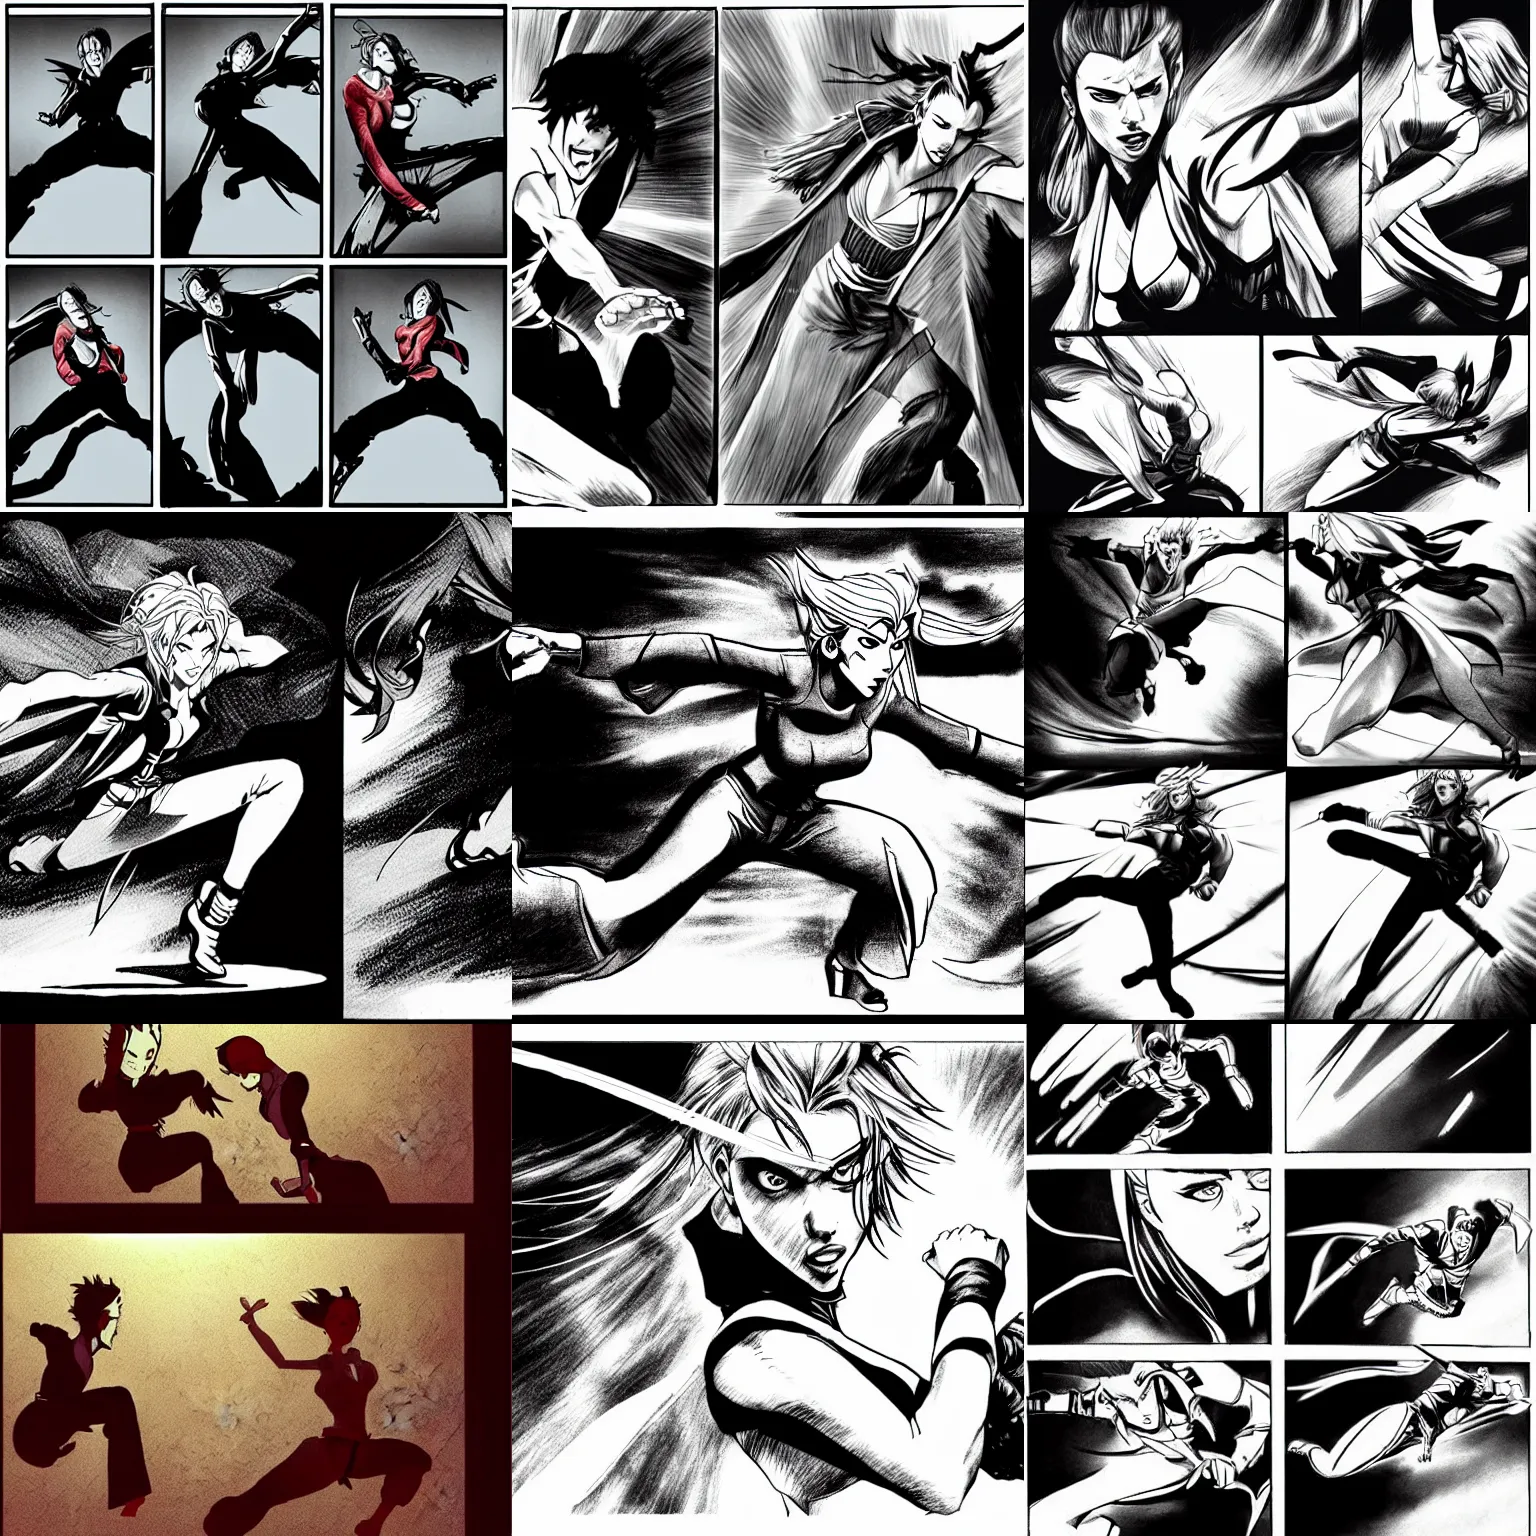 Prompt: scarlett johansson with angry expression, 2 comic panel flying kick battle poses. dramatic lighting, ninja scroll anime style, pencil and ink manga drawing